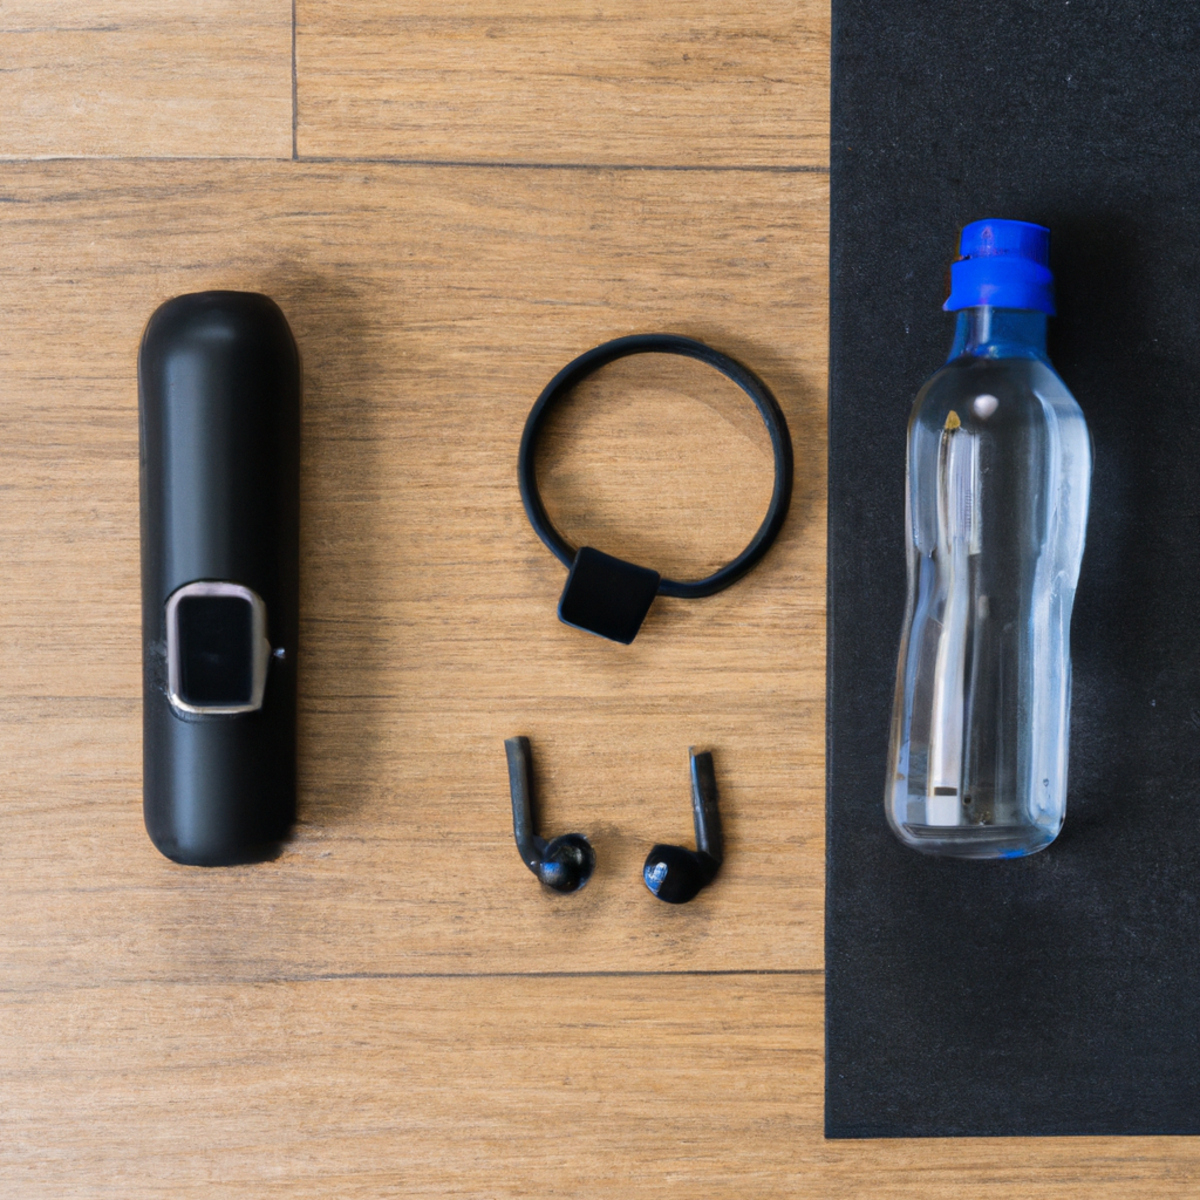 The photo features a sleek black fitness tracker watch, a pair of wireless earbuds, a water bottle, and a yoga mat neatly arranged on a wooden floor. The fitness tracker, labeled "Exercise: Fitness Apps and Wearables," displays the user's heart rate and step count, while the earbuds provide high-quality sound for a motivating workout playlist. The water bottle is filled with refreshing hydration, and the yoga mat is ready for a post-workout stretch. The objects are positioned in a way that suggests an active and healthy lifestyle, encouraging readers to incorporate these must-have fitness accessories, including Exercise: Fitness Apps and Wearables, into their own workout routines.